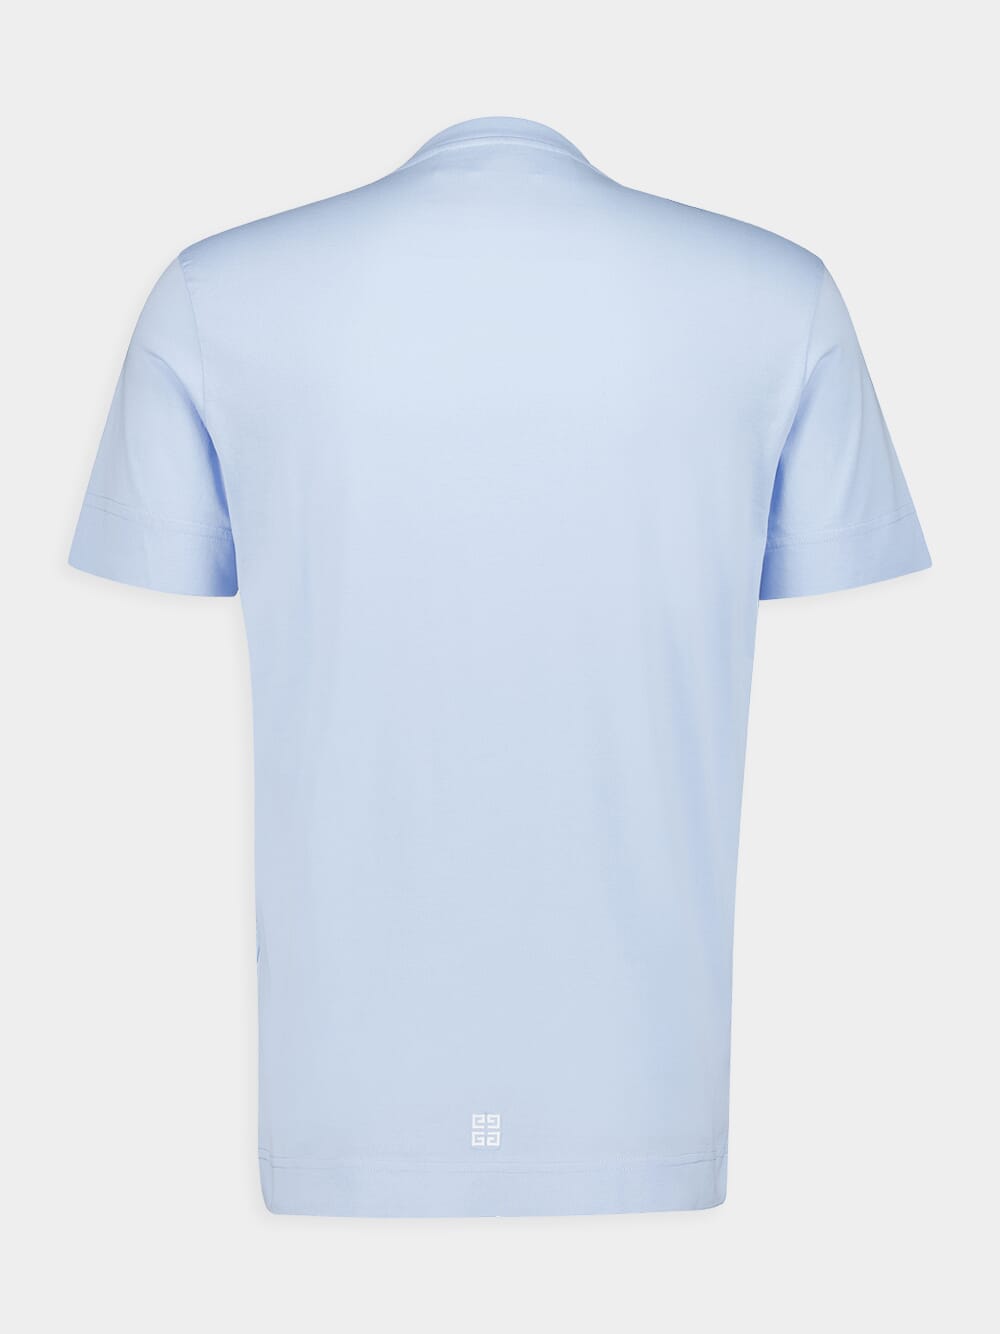 Logo Embroidered Baby Blue T-Shirt